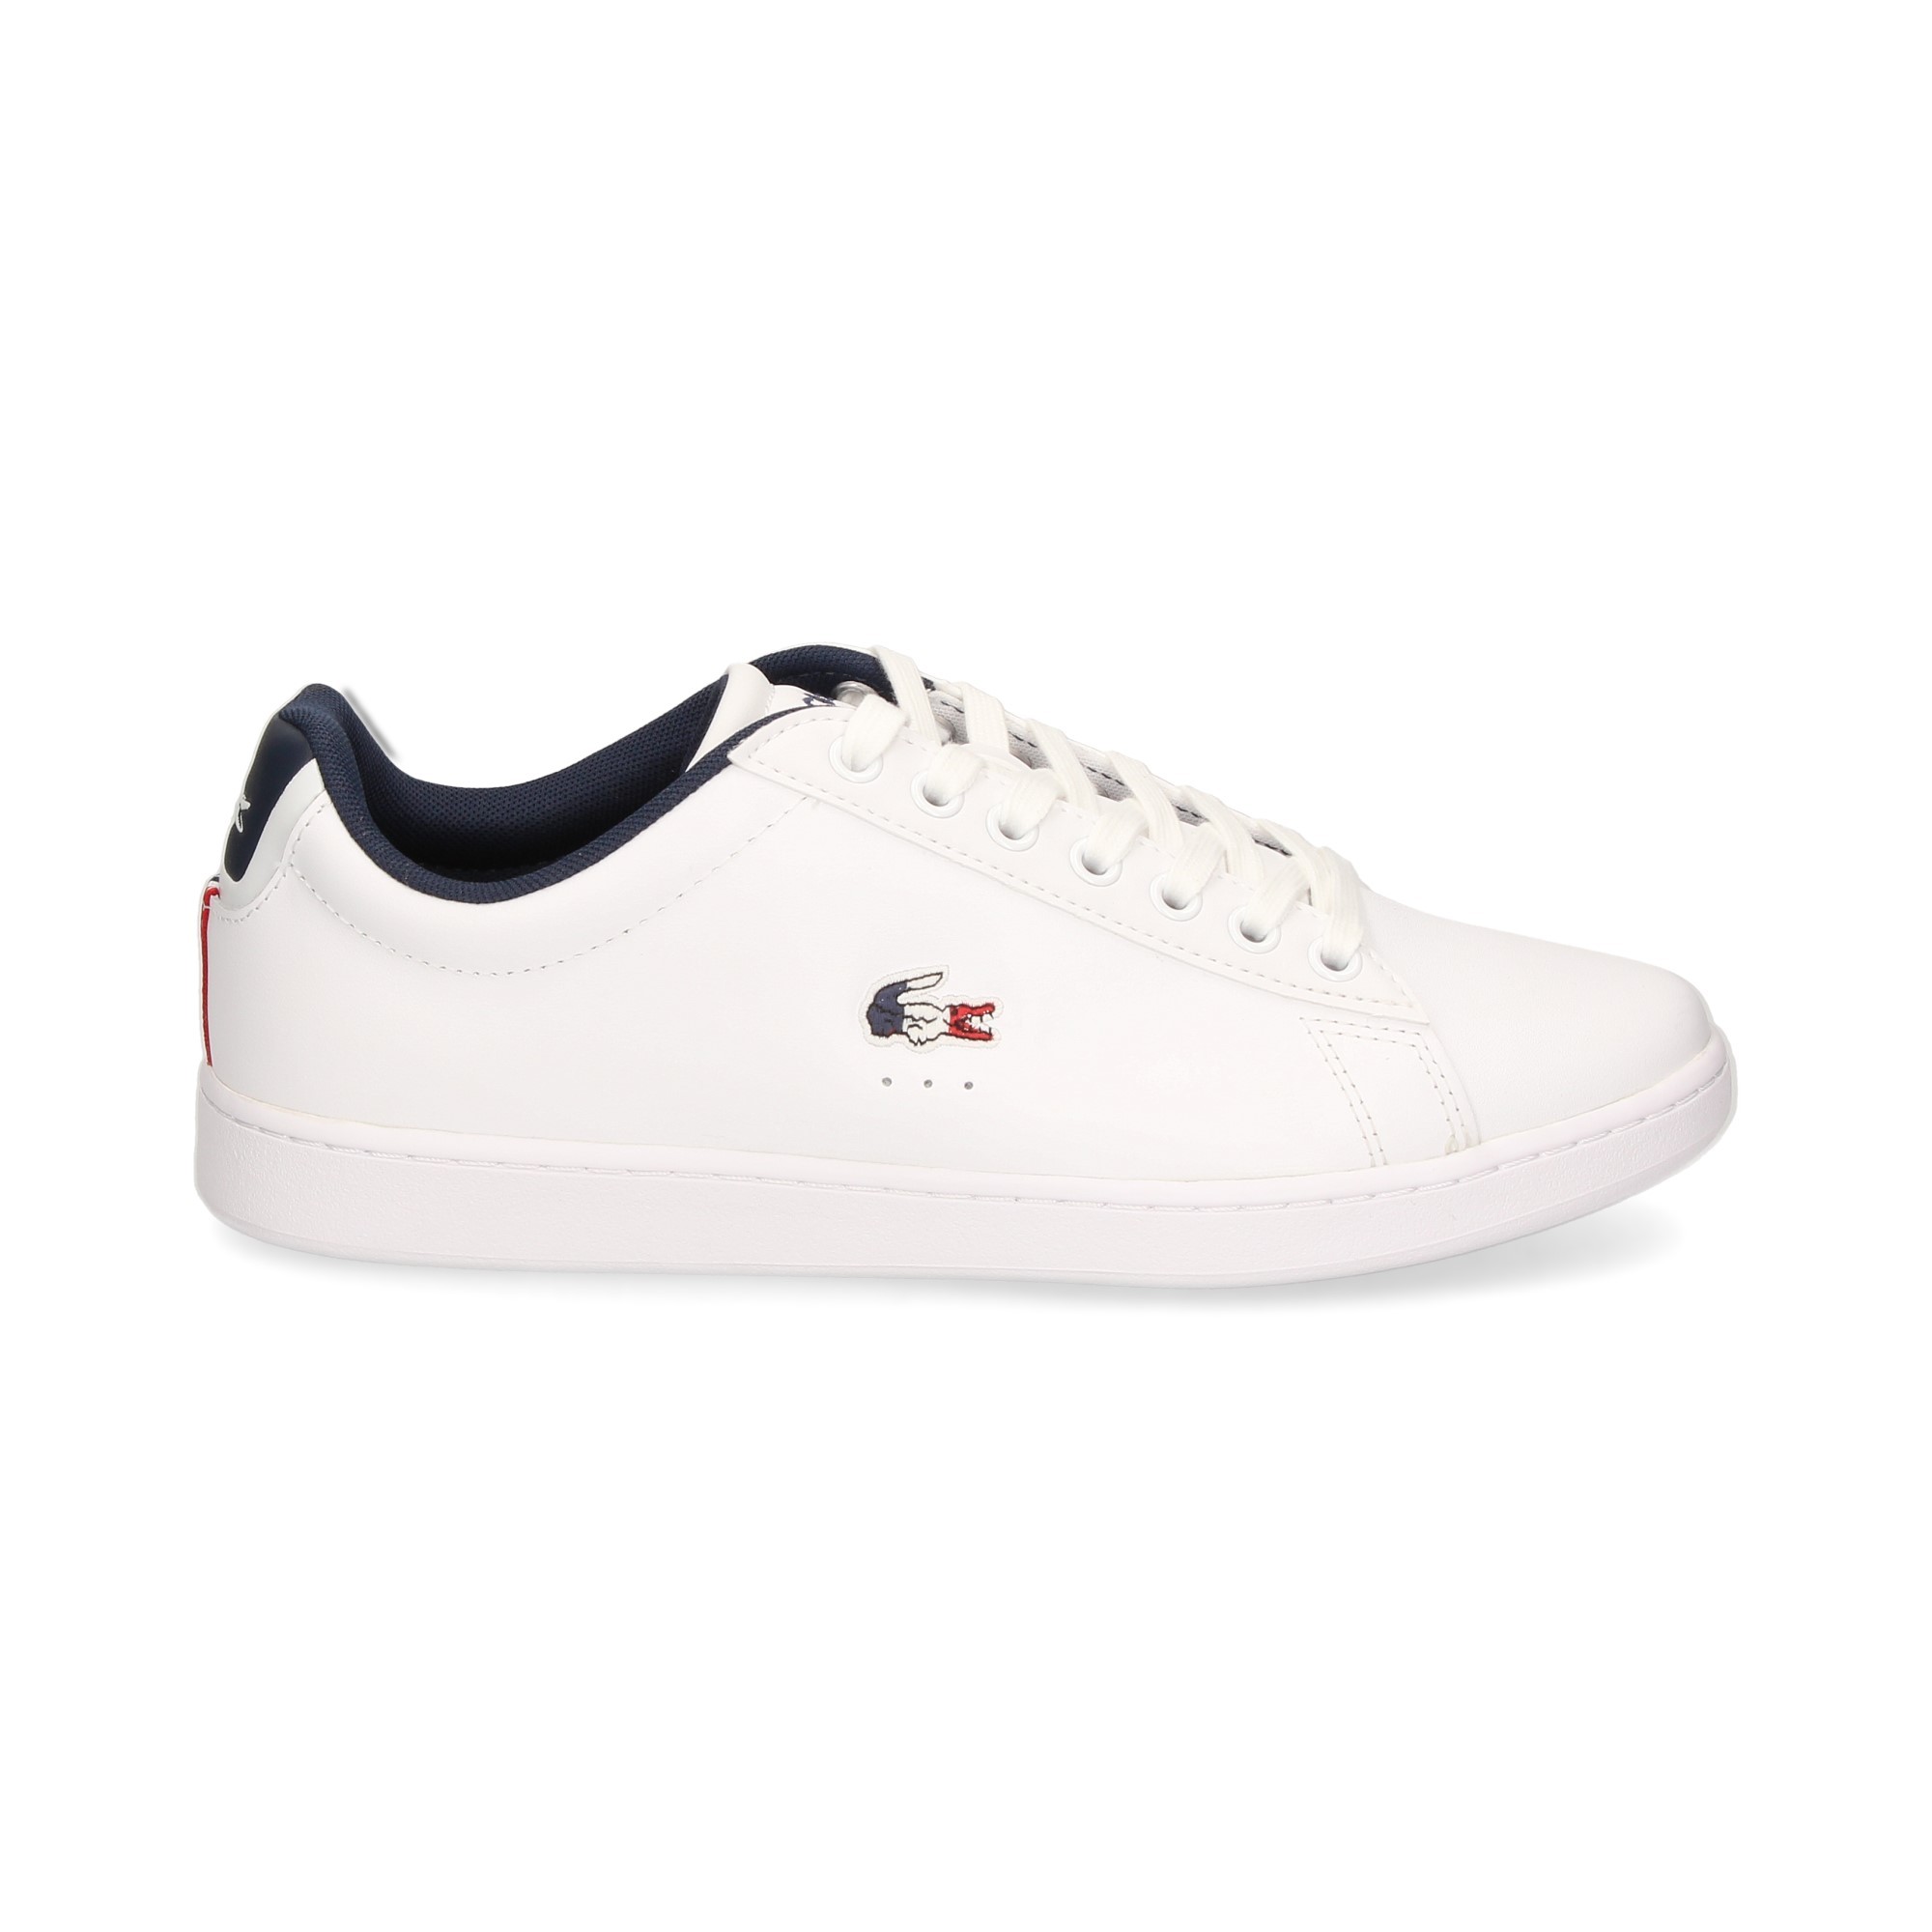 LACOSTE Men's sneakers 39SMA0033 407 WHT/NVY/RED